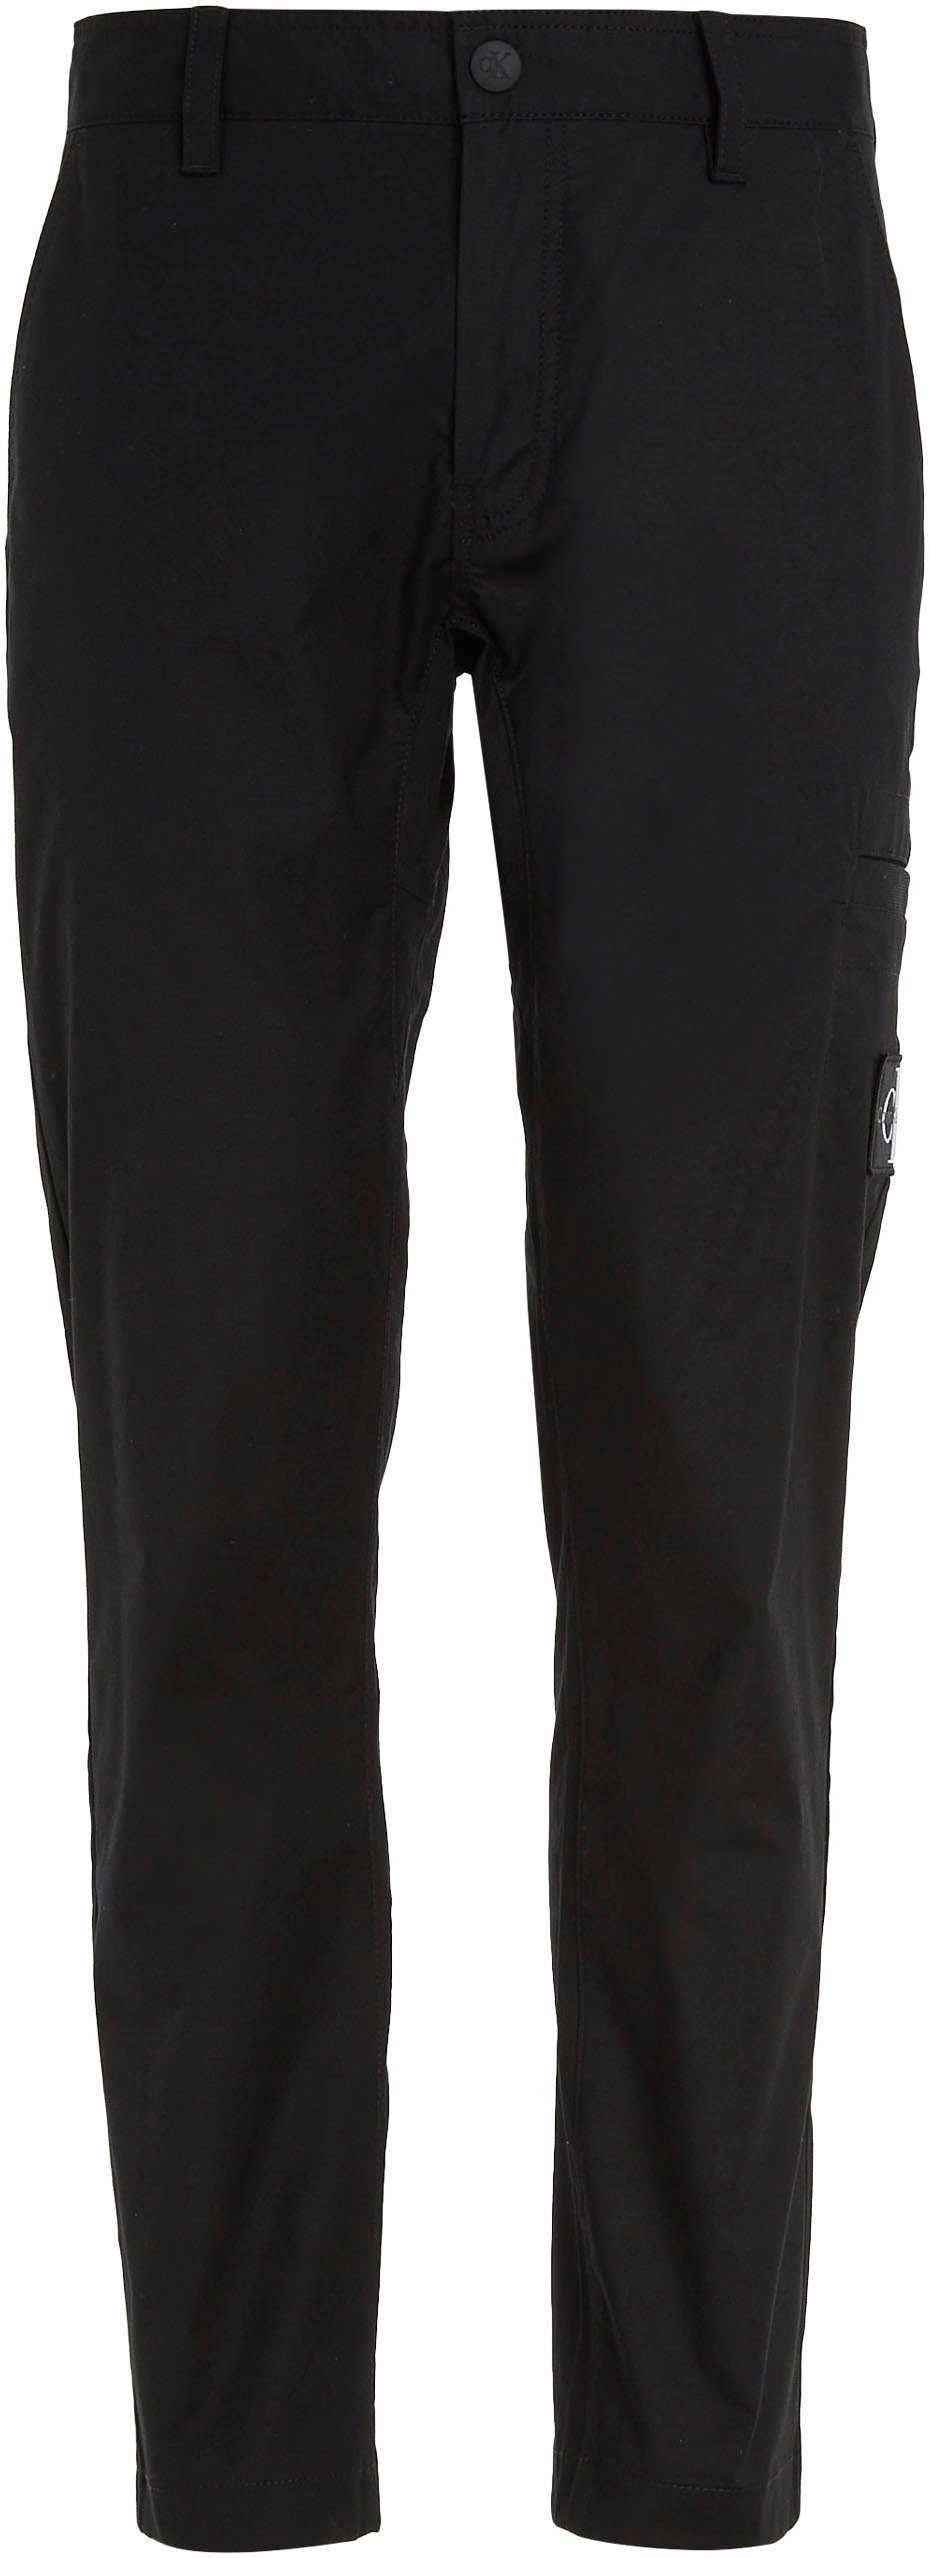 CHINO Jeans RIPSTOP Chinohose Klein Black Calvin Ck TAPER